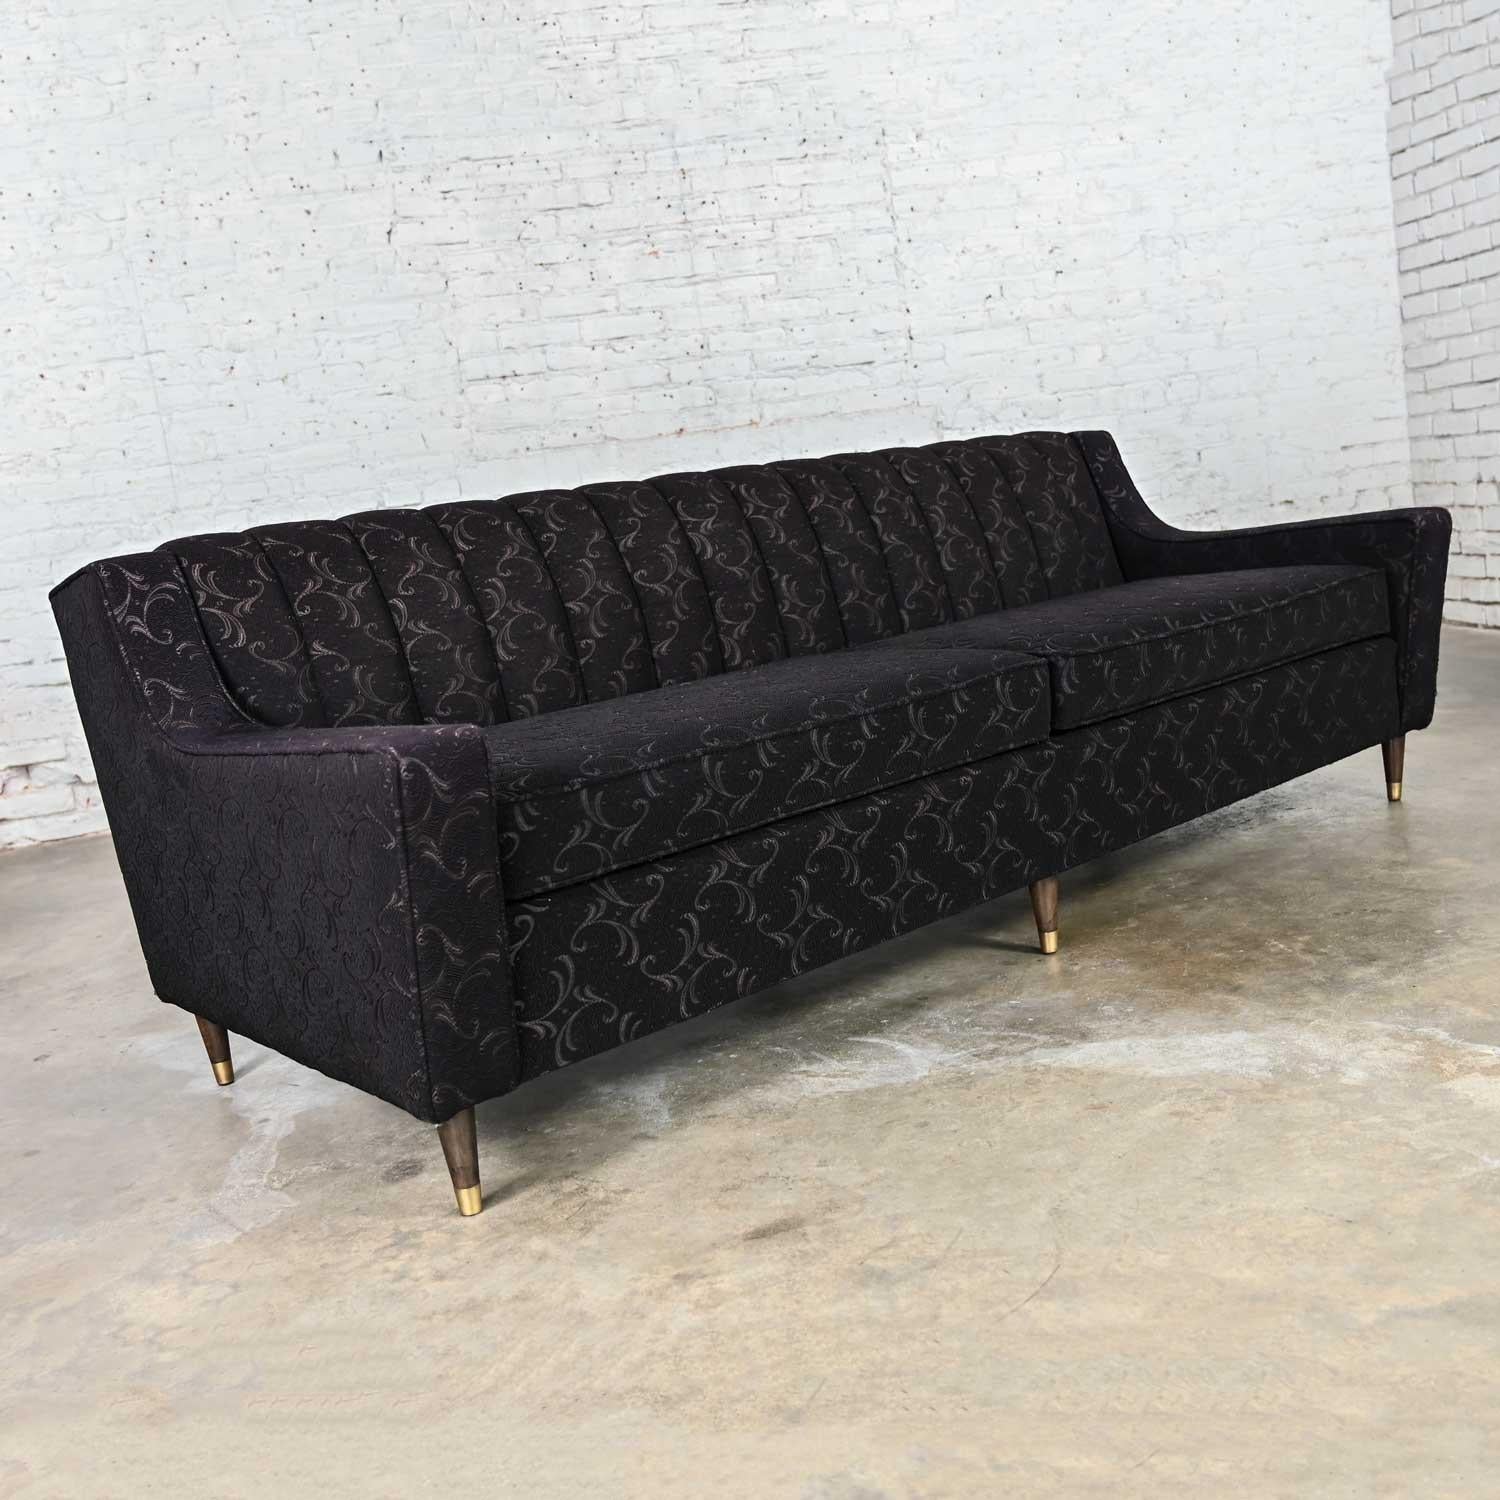 American Mid-Century Modern Modified Lawson Style Sofa Black Frieze Fabric & Channel Back For Sale